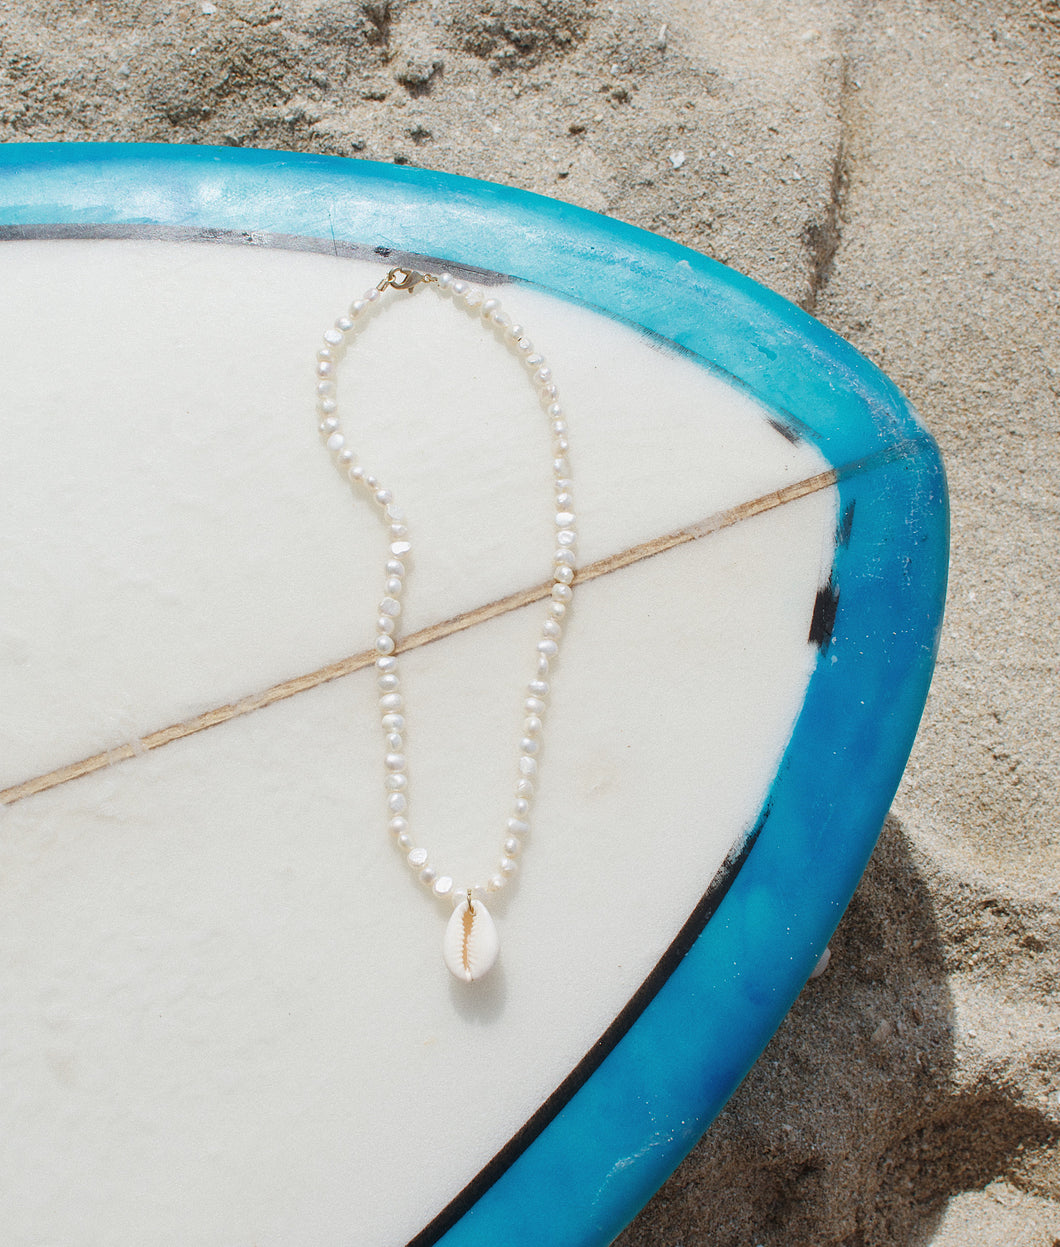 The Ailani Pearl Necklace